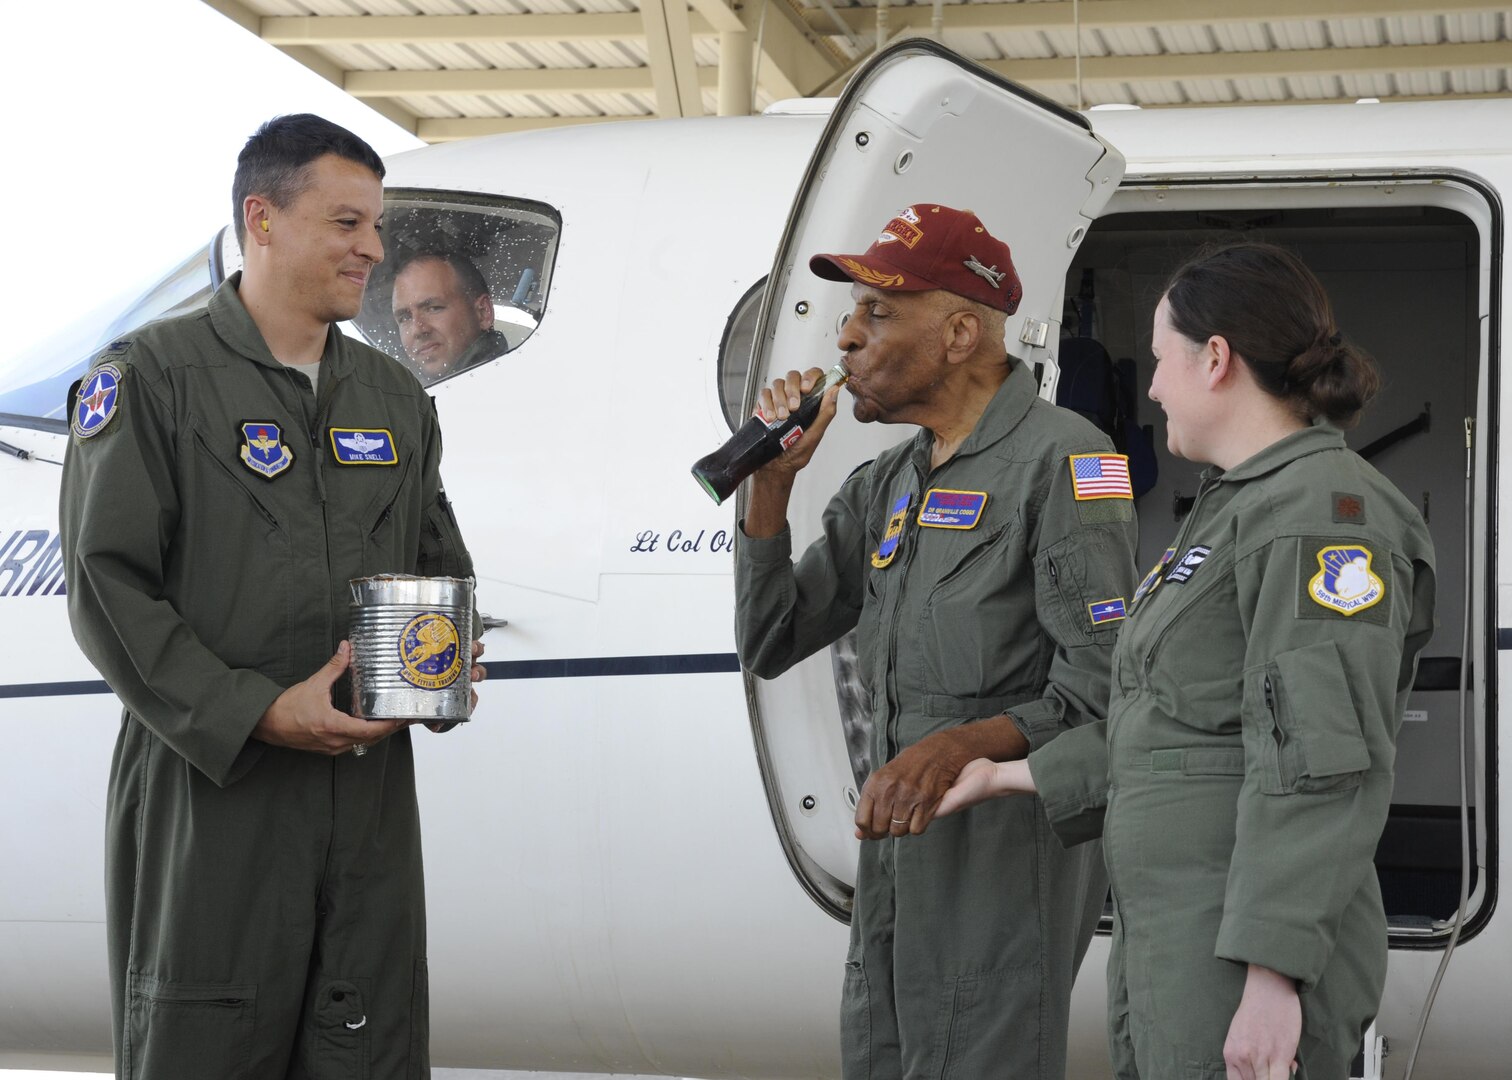 Col. Michael Snell (left), 12th Flying Training Wing vice commander, presents Dr. Granville Coggs (center), documented original Tuskegee Airman, a chilled soda as part of his ‘fini’ flight ceremony for his 90th birthday July 30 at Joint Base San Antonio-Randolph. After his flight with the 99th Flying Training Squadron, Coggs was presented with 99th FTS memorabilia and had his name badge “retired” during a ceremony in his honor.